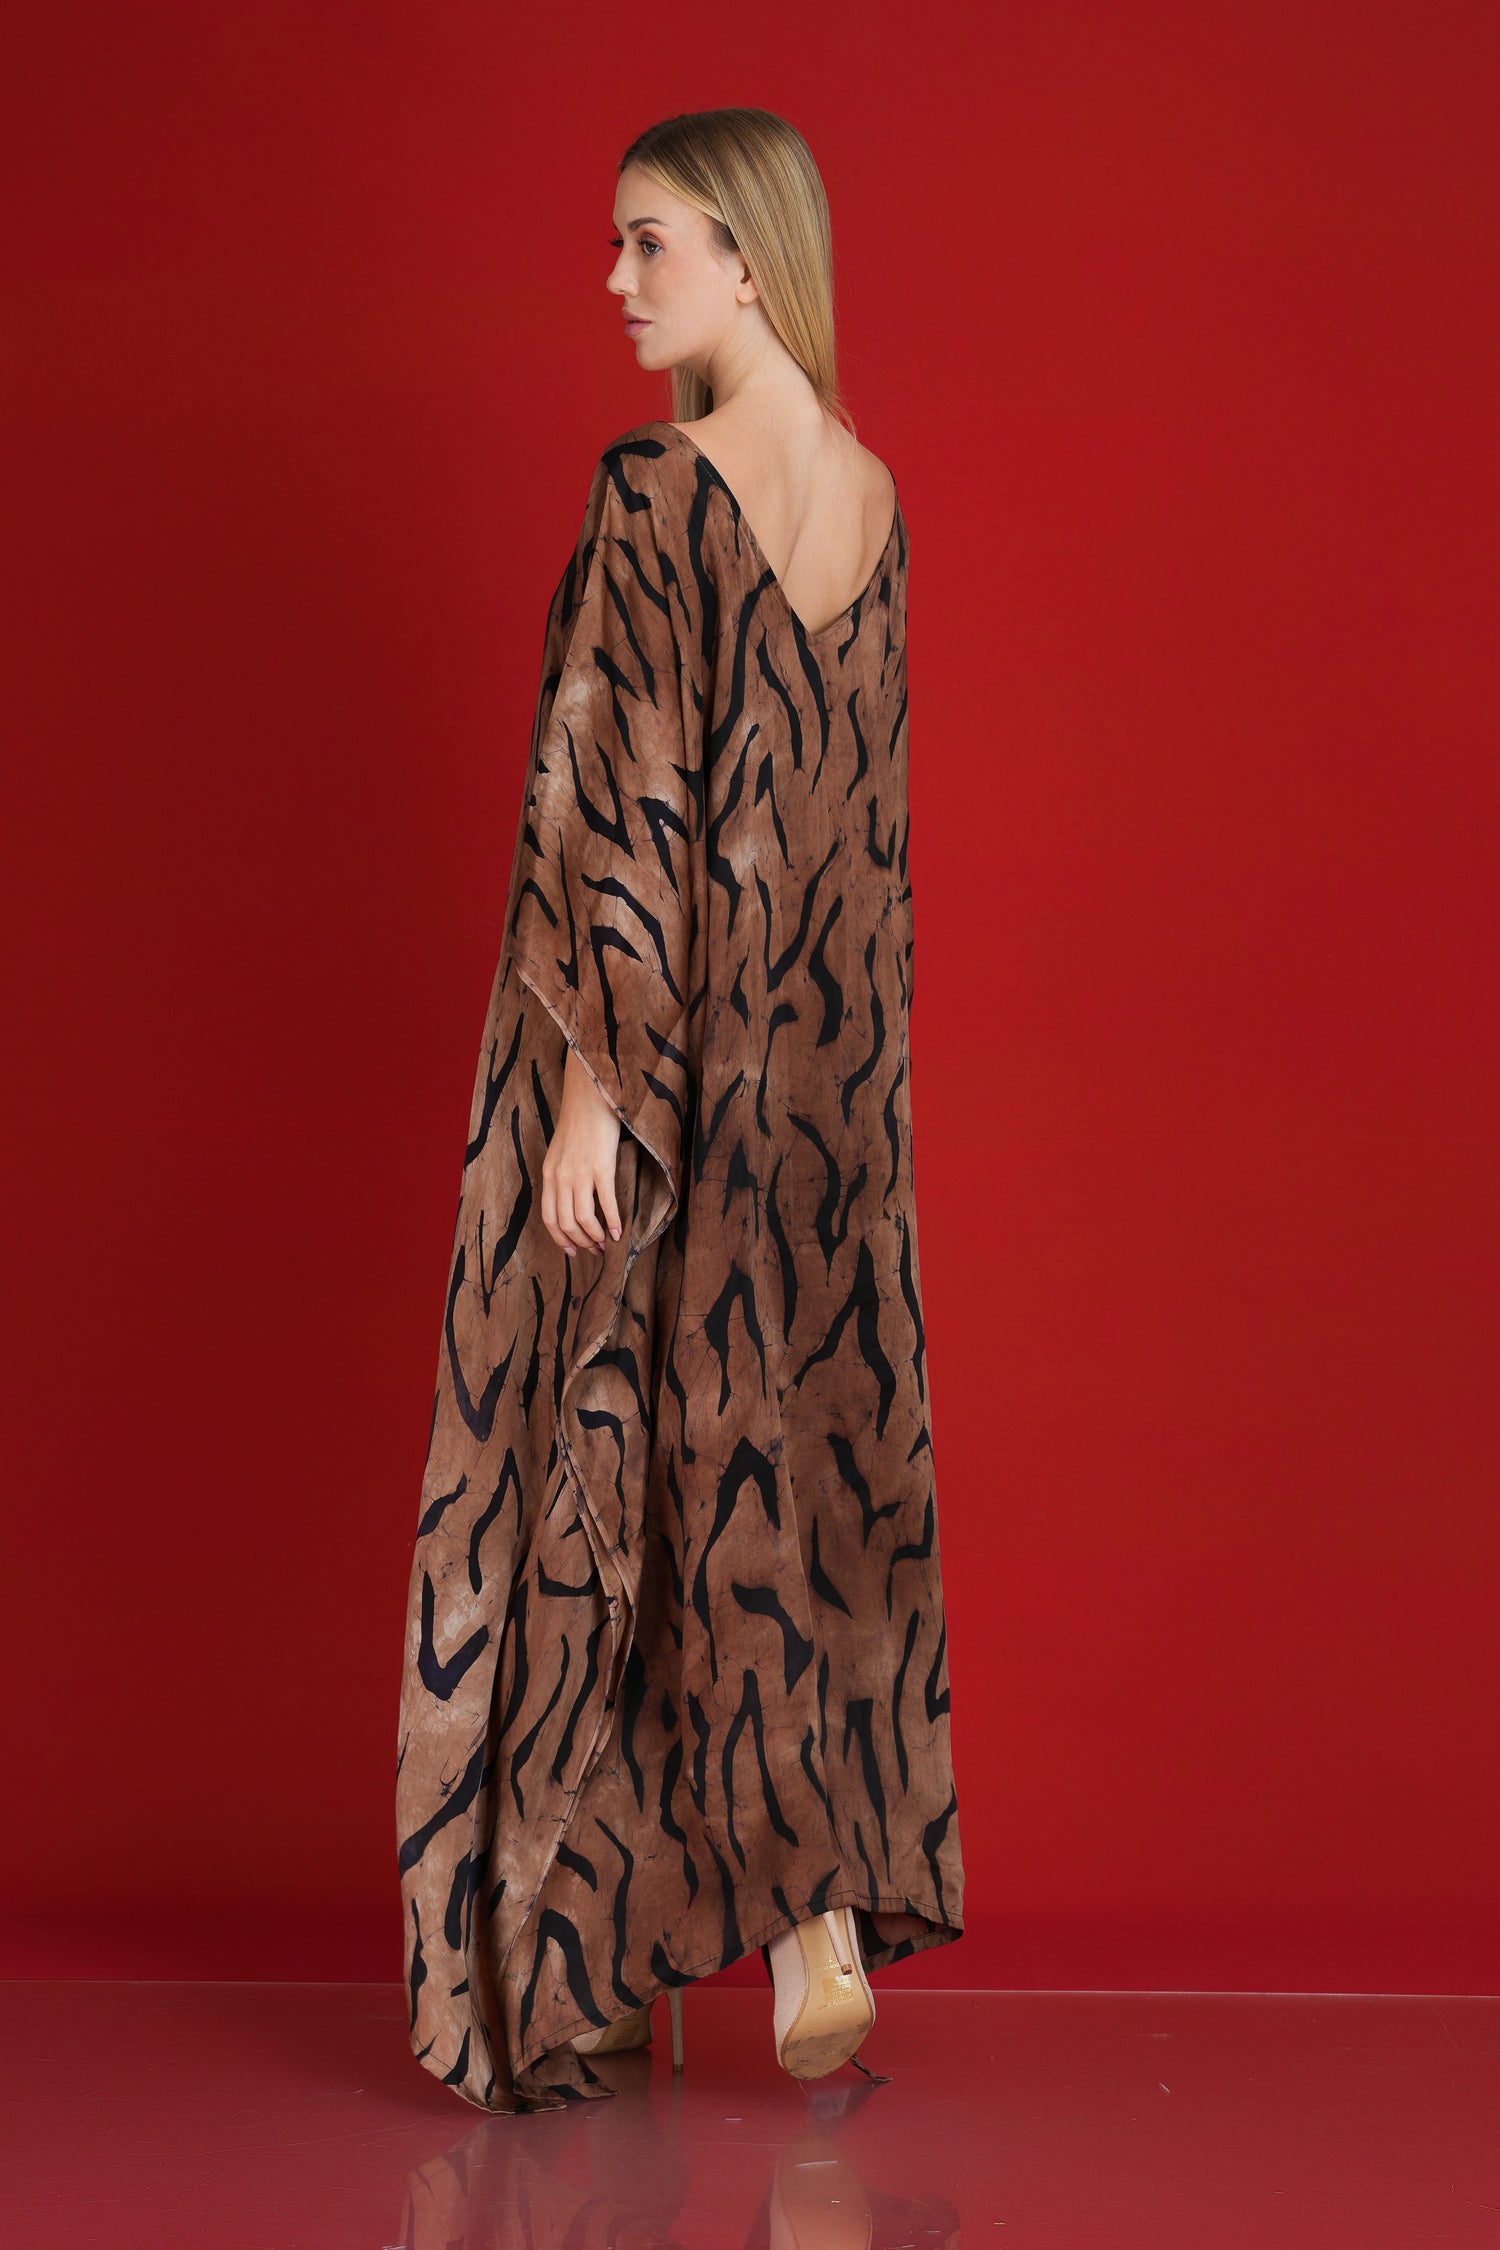 Tiger Prowess Kaftan: Fierce and Fearless